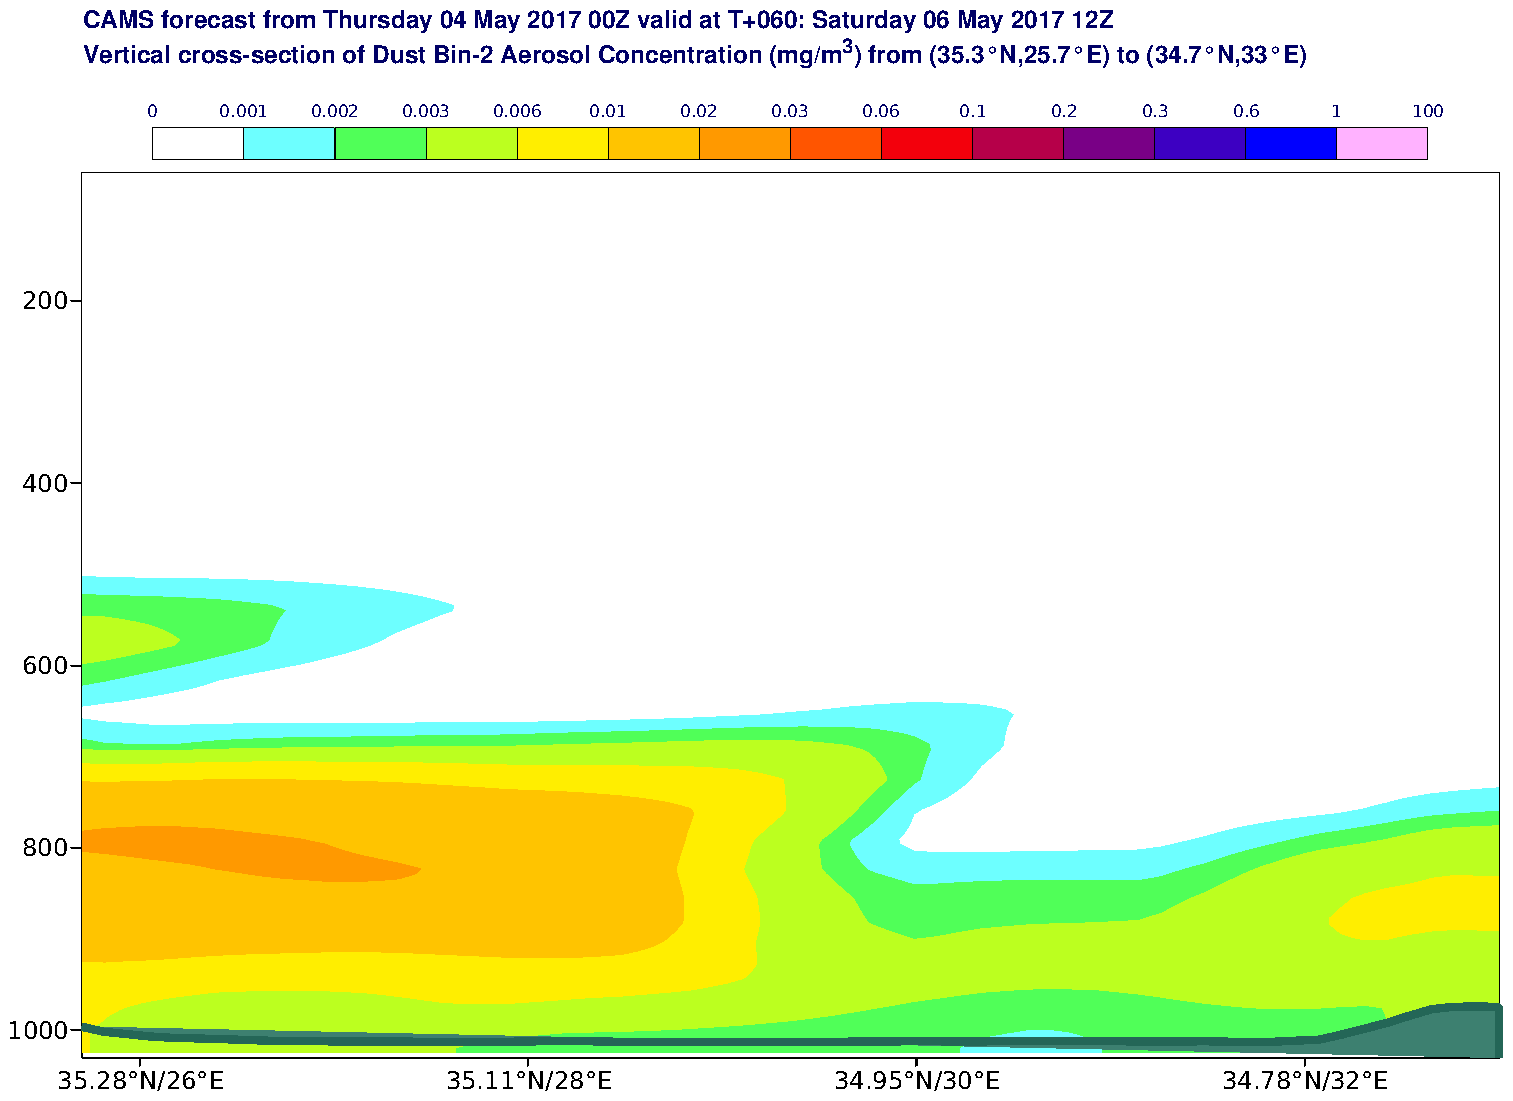 Vertical cross-section of Dust Bin-2 Aerosol Concentration (mg/m3) valid at T60 - 2017-05-06 12:00